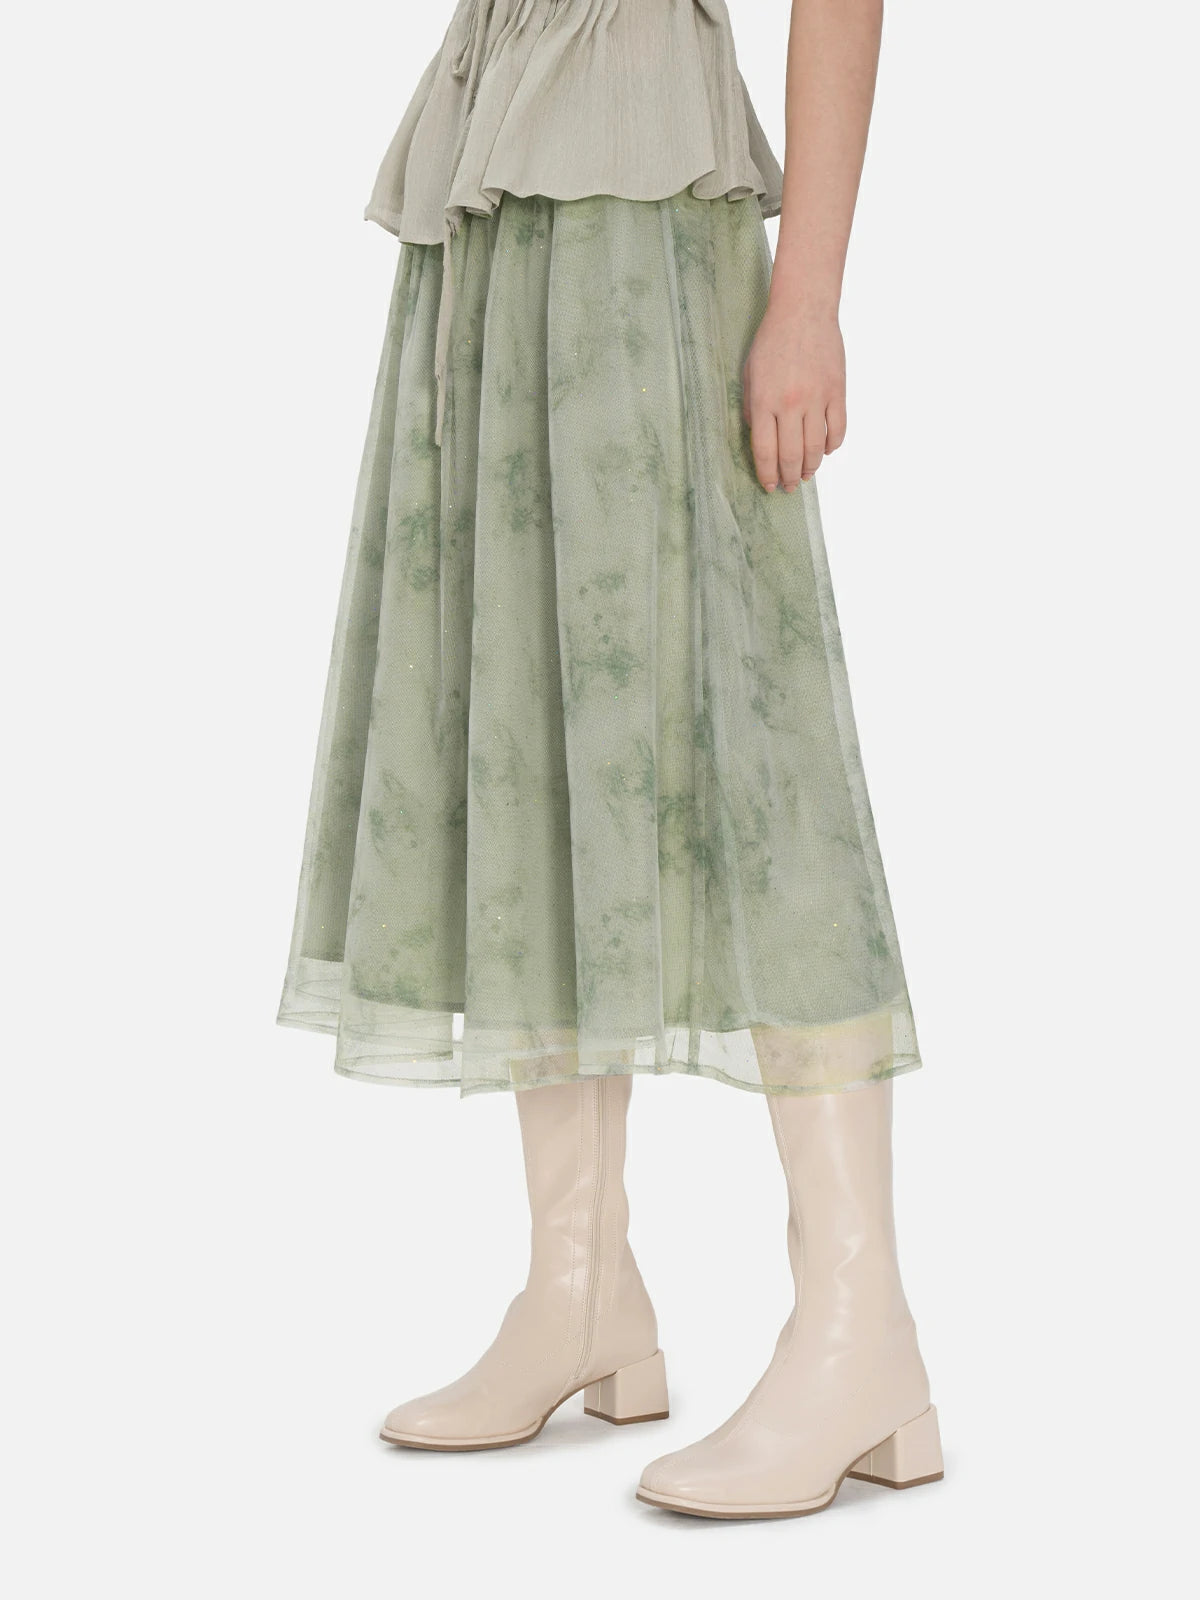 Comfortable and chic mid-length skirt in green, designed with an elastic waistband and sheer mesh adorned with delicate floral prints, perfect for versatile wear.